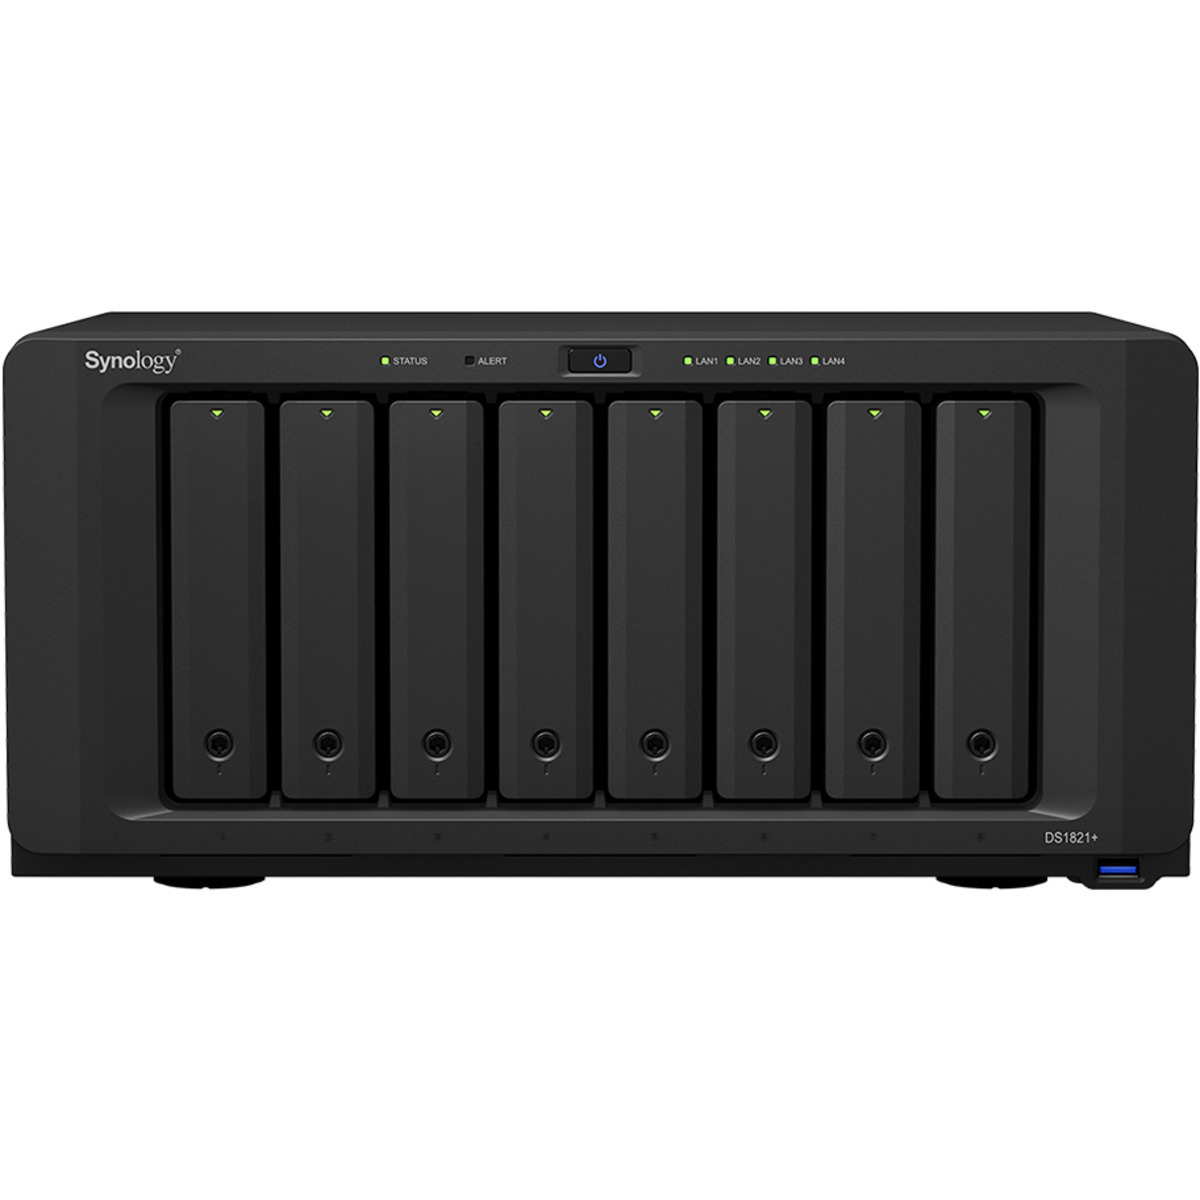 Synology DiskStation DS1821+ 48tb 8-Bay Desktop Multimedia / Power User / Business NAS - Network Attached Storage Device 8x6tb Western Digital Red Plus WD60EFPX 3.5 5640rpm SATA 6Gb/s HDD NAS Class Drives Installed - Burn-In Tested - FREE RAM UPGRADE DiskStation DS1821+